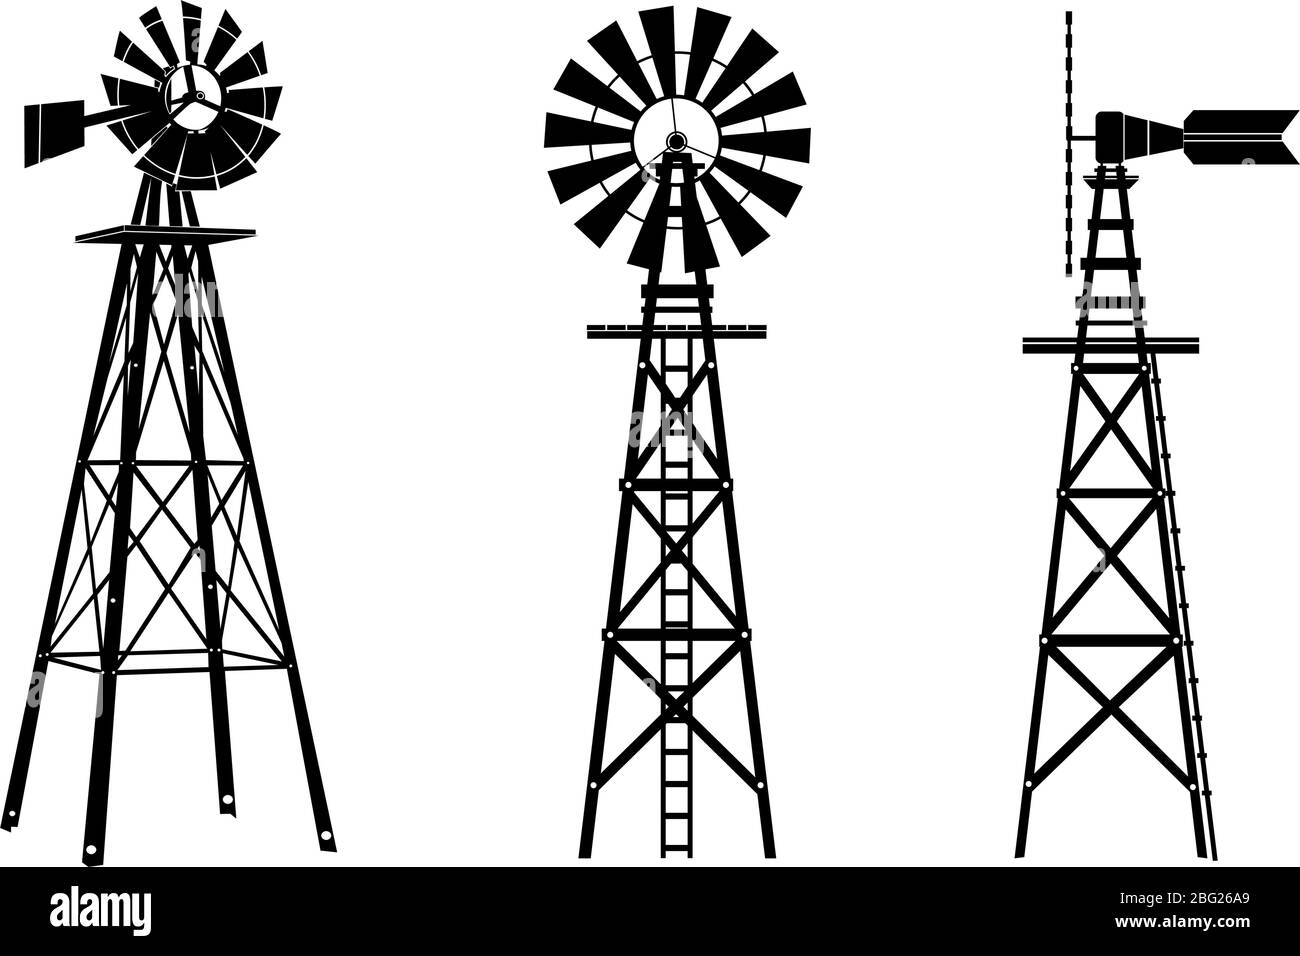 Windmill silhouette illustration vector on white background Stock Vector